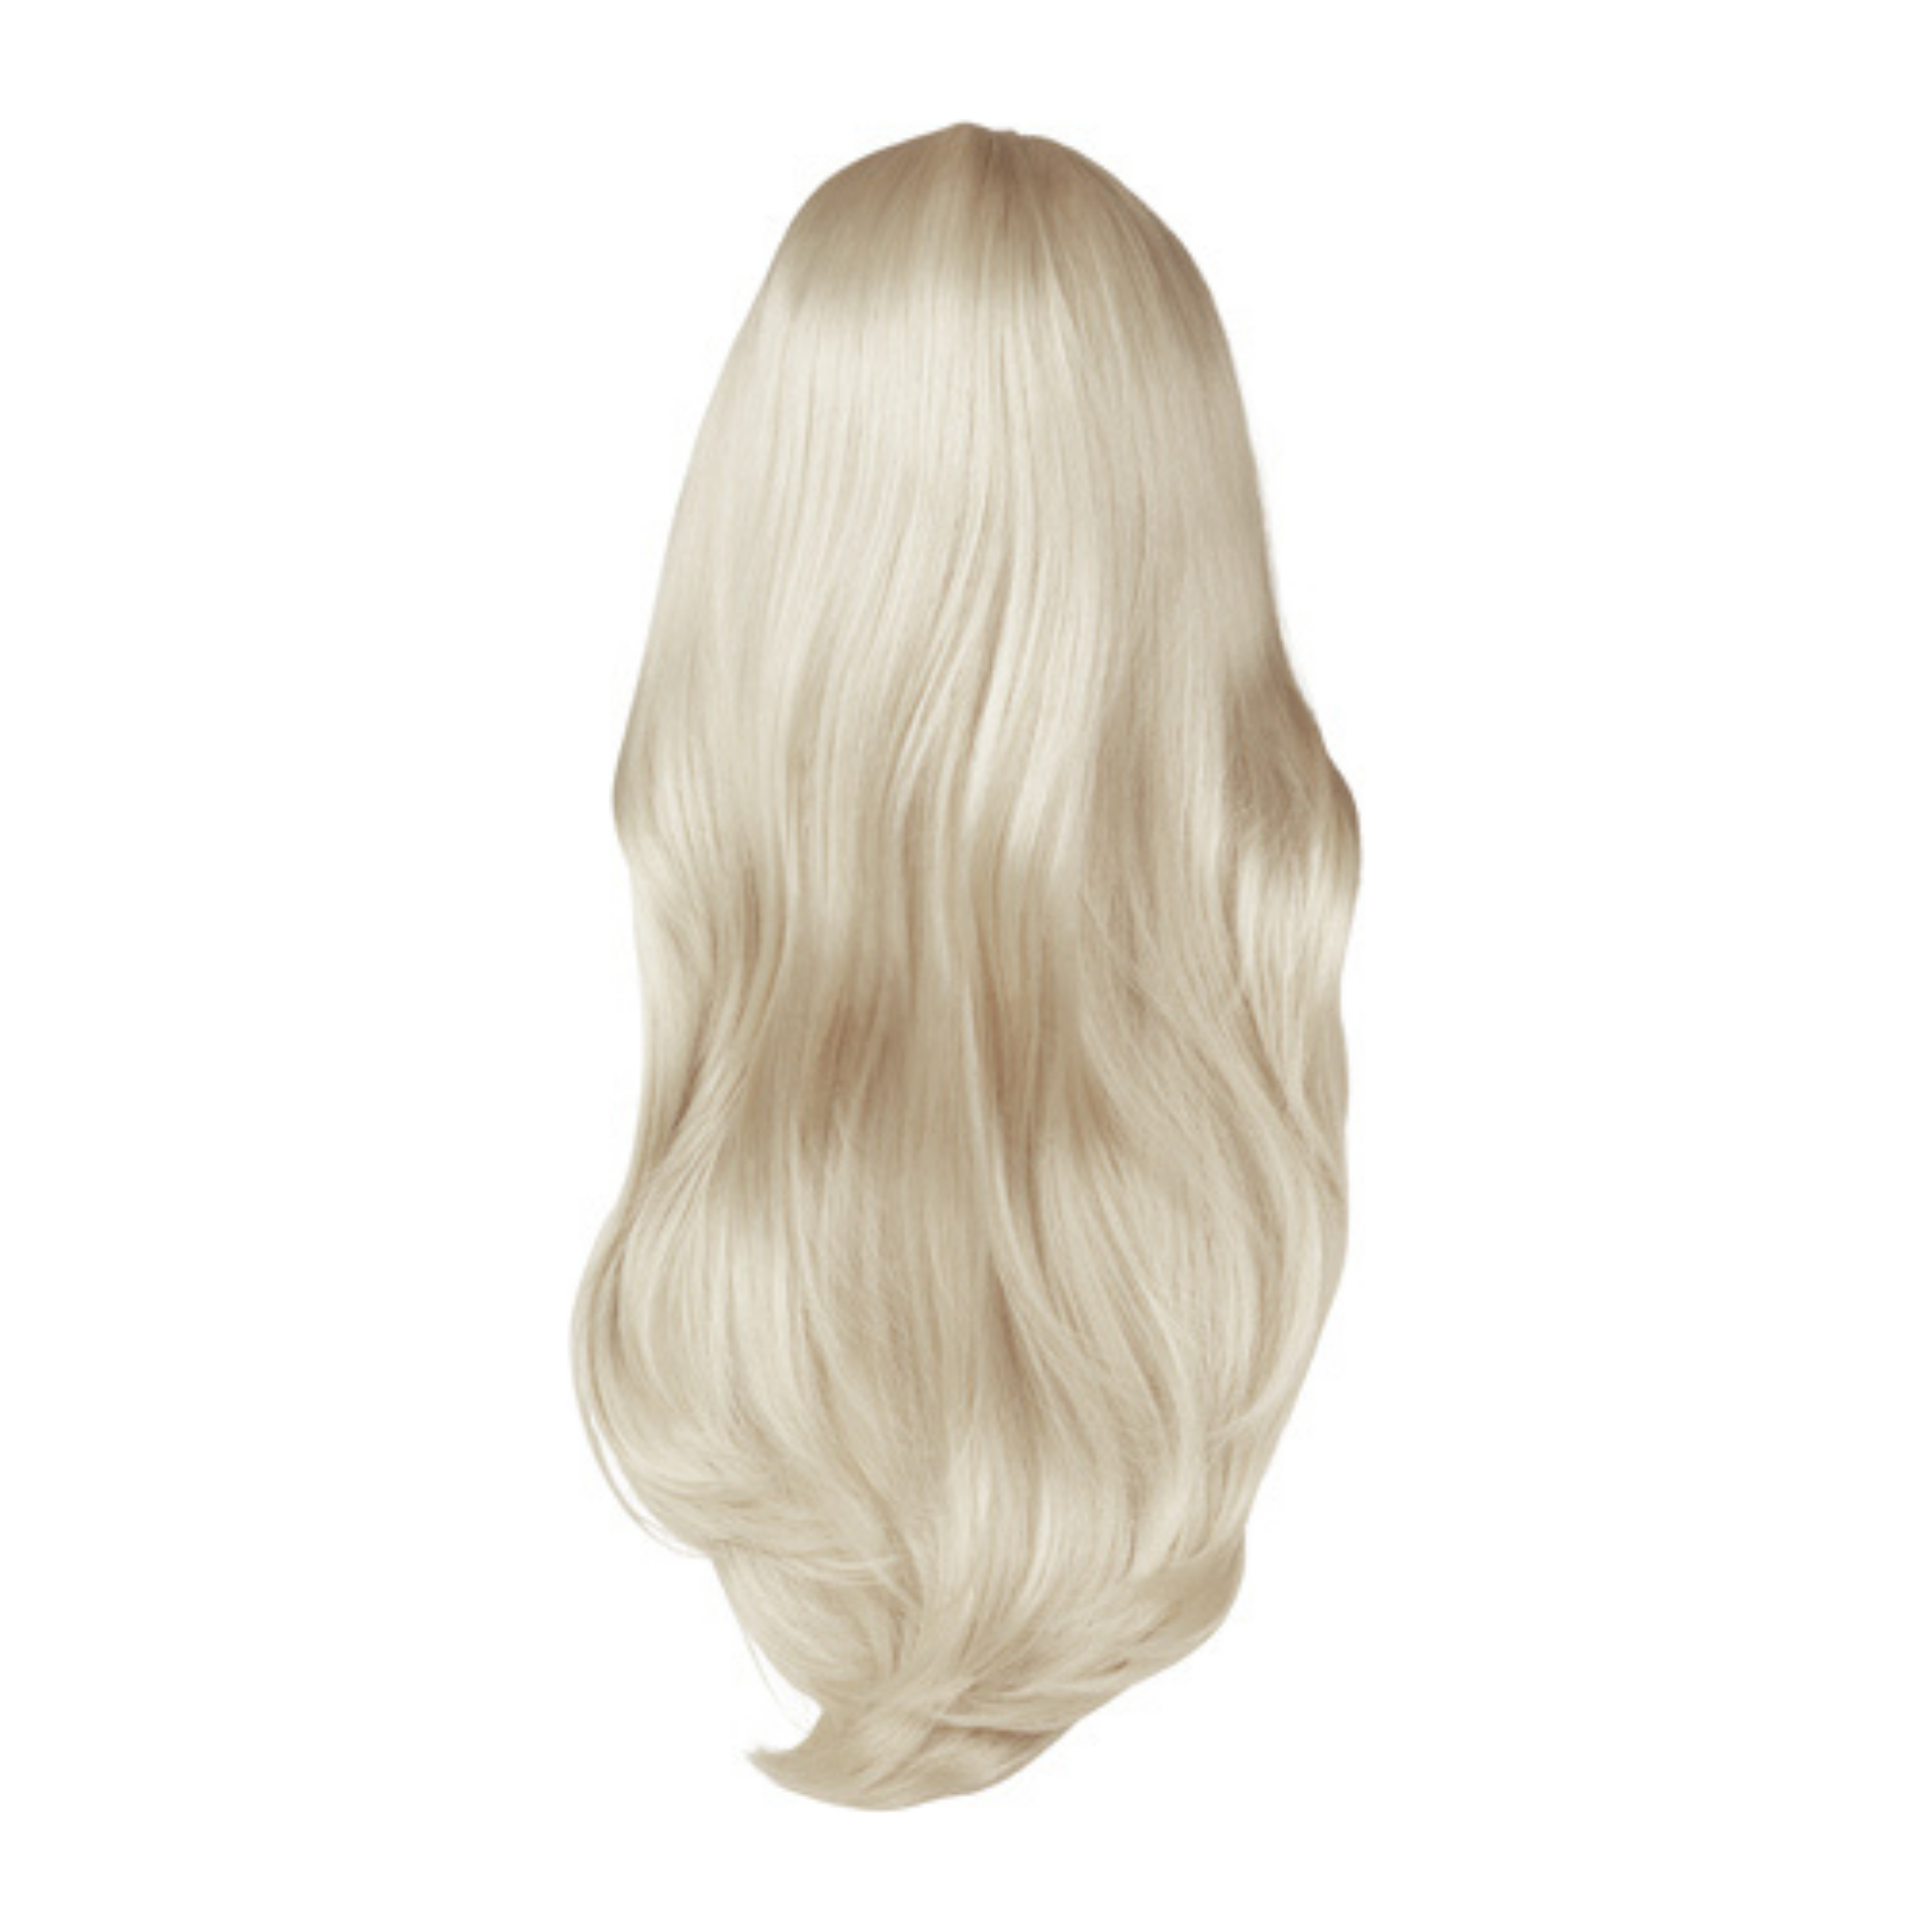 image of hair rehab london half wig hairpiece in shade ice blonde